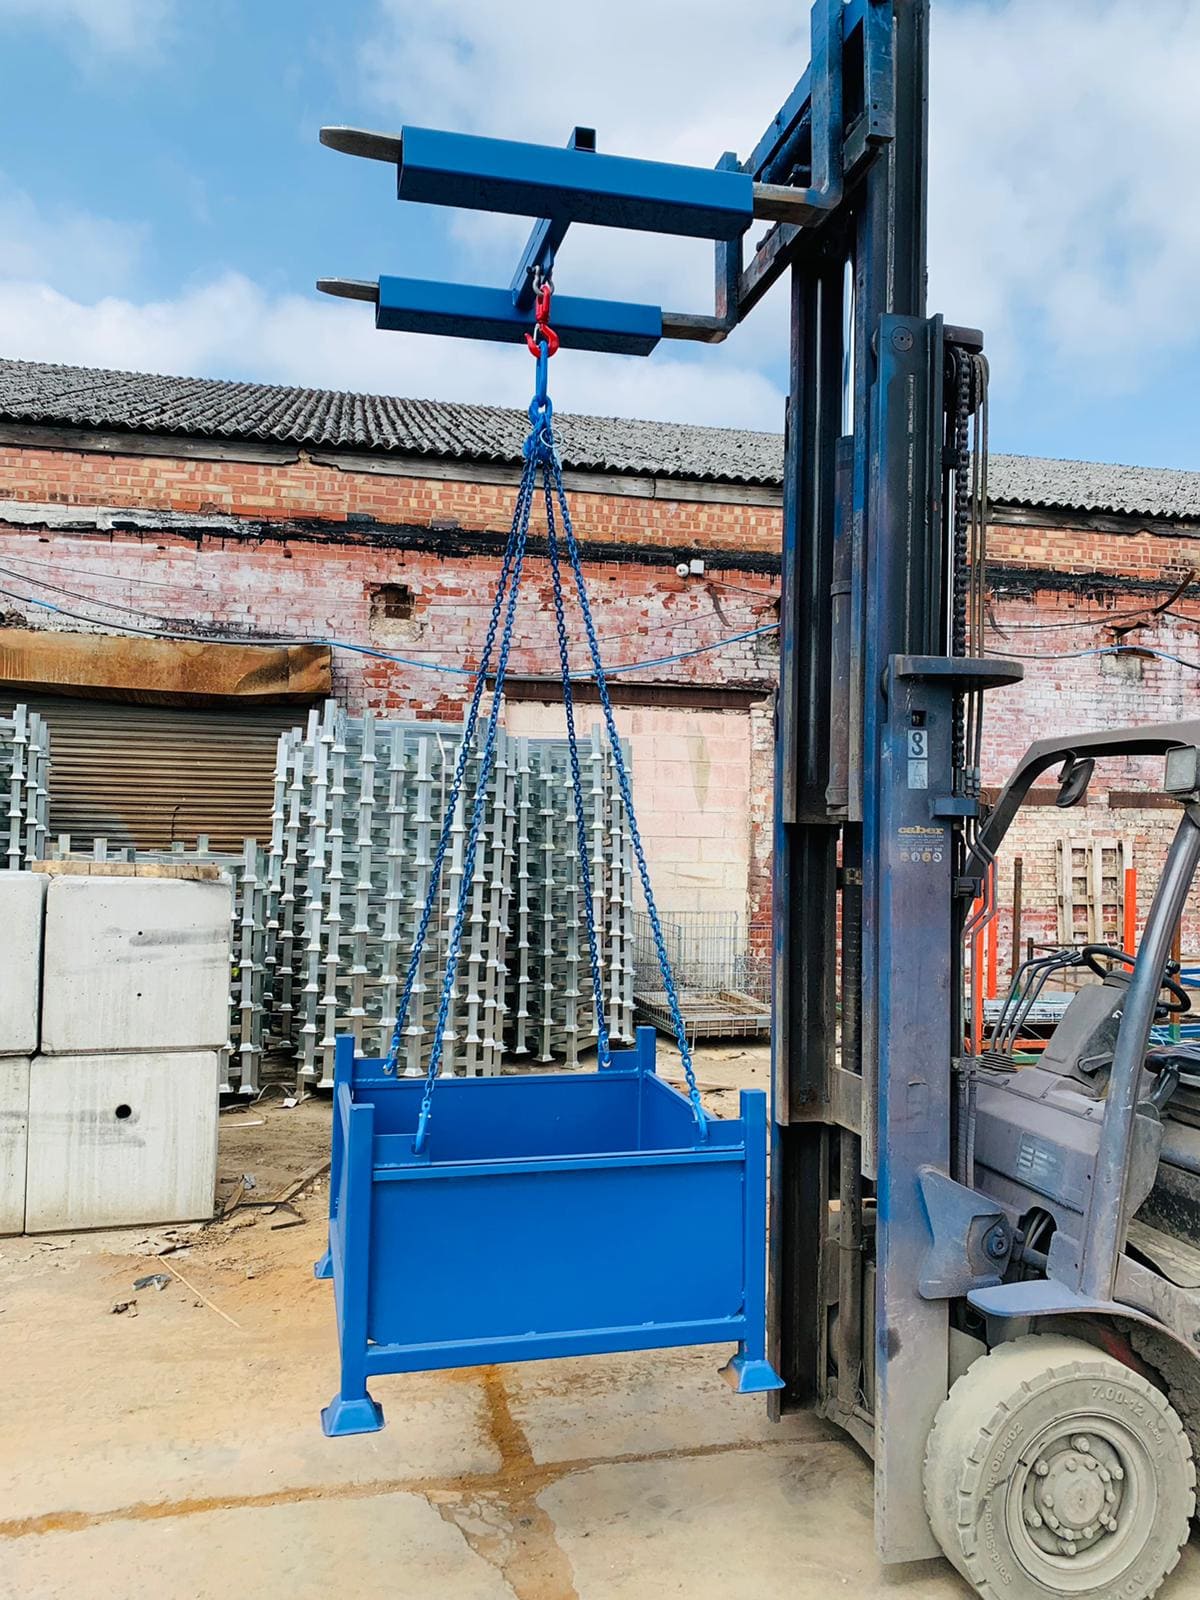 Image of stillage being lifted by forklift crane